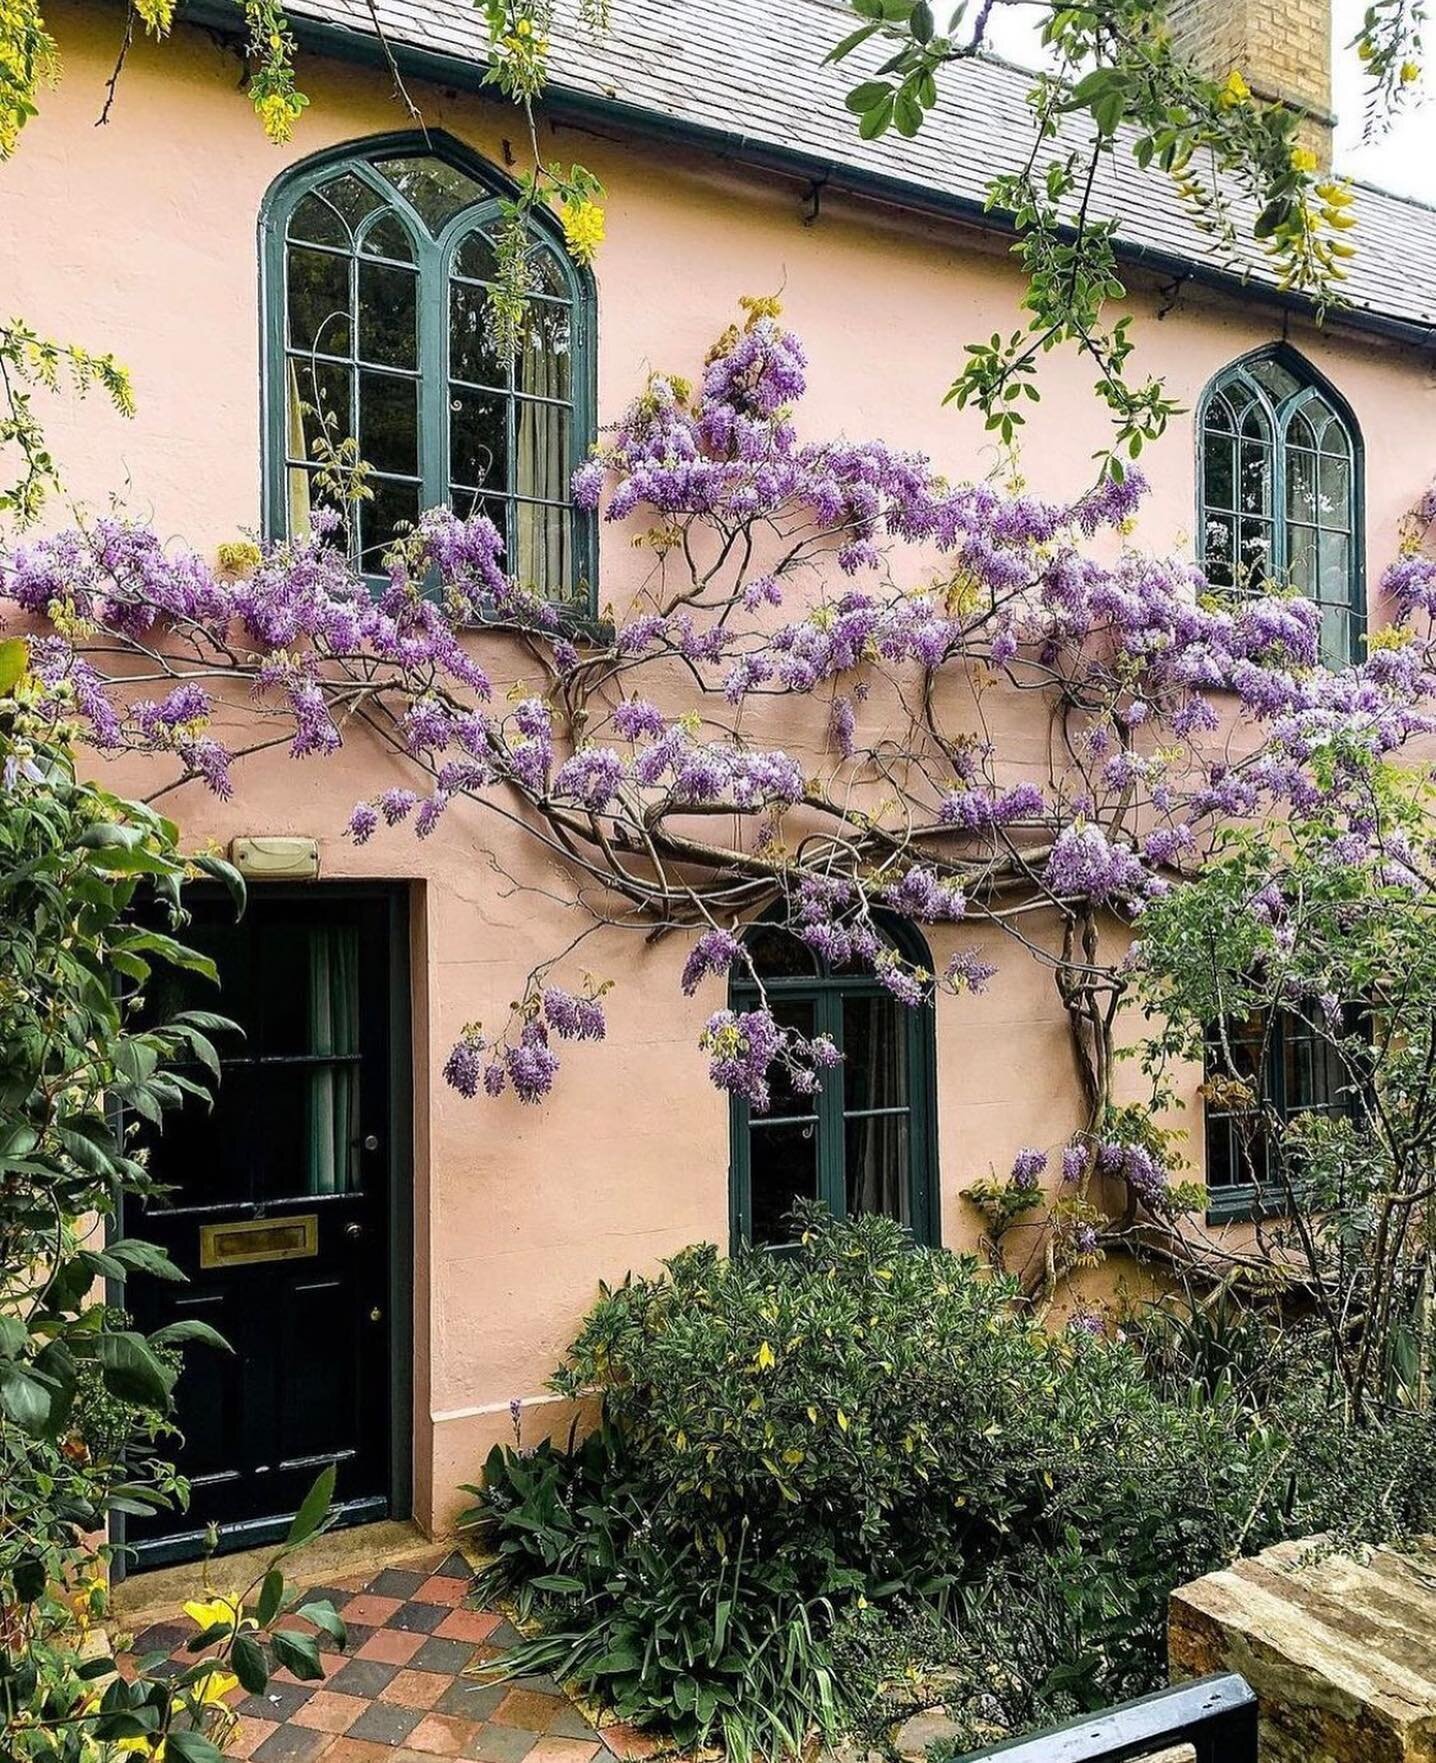 Beautiful exterior from @janefrenchhome . Just love this! 

#frenchhome #frenchcountryhouse #design #architecture #inspo